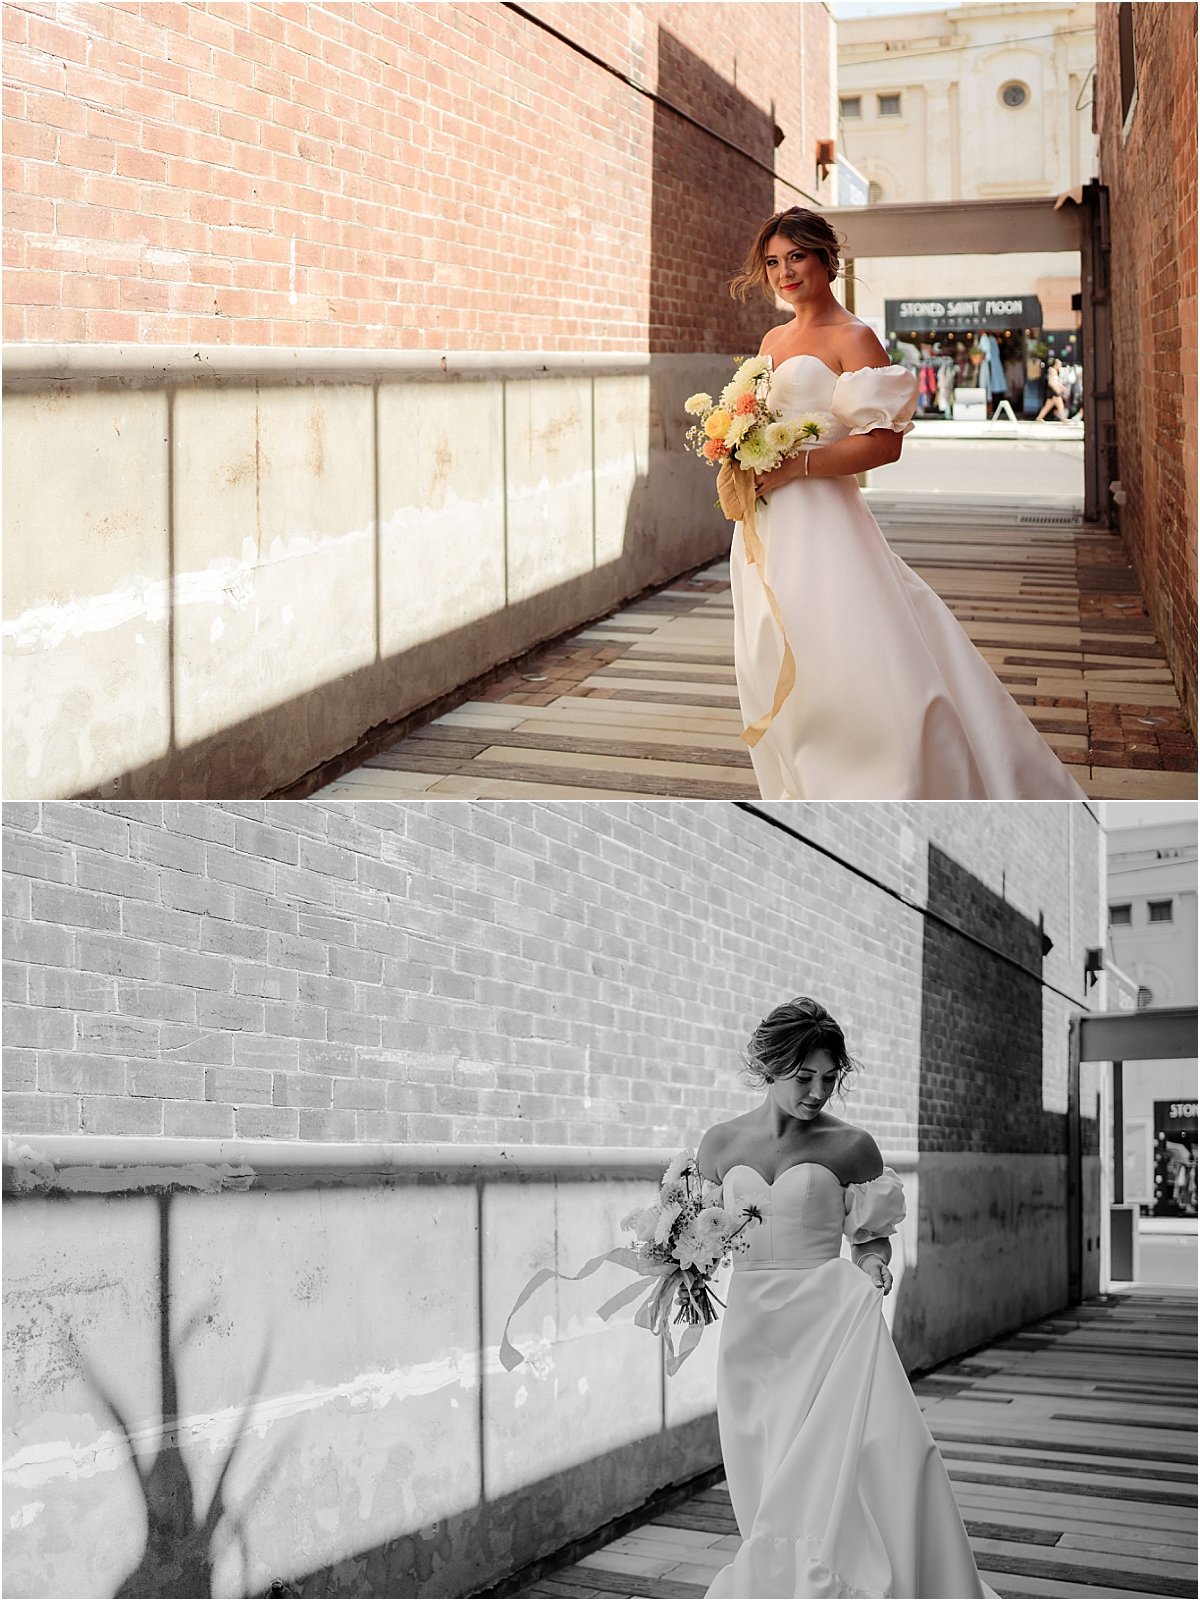 Bride standing in front of brick wall holding orange and yellow wedding bouquet